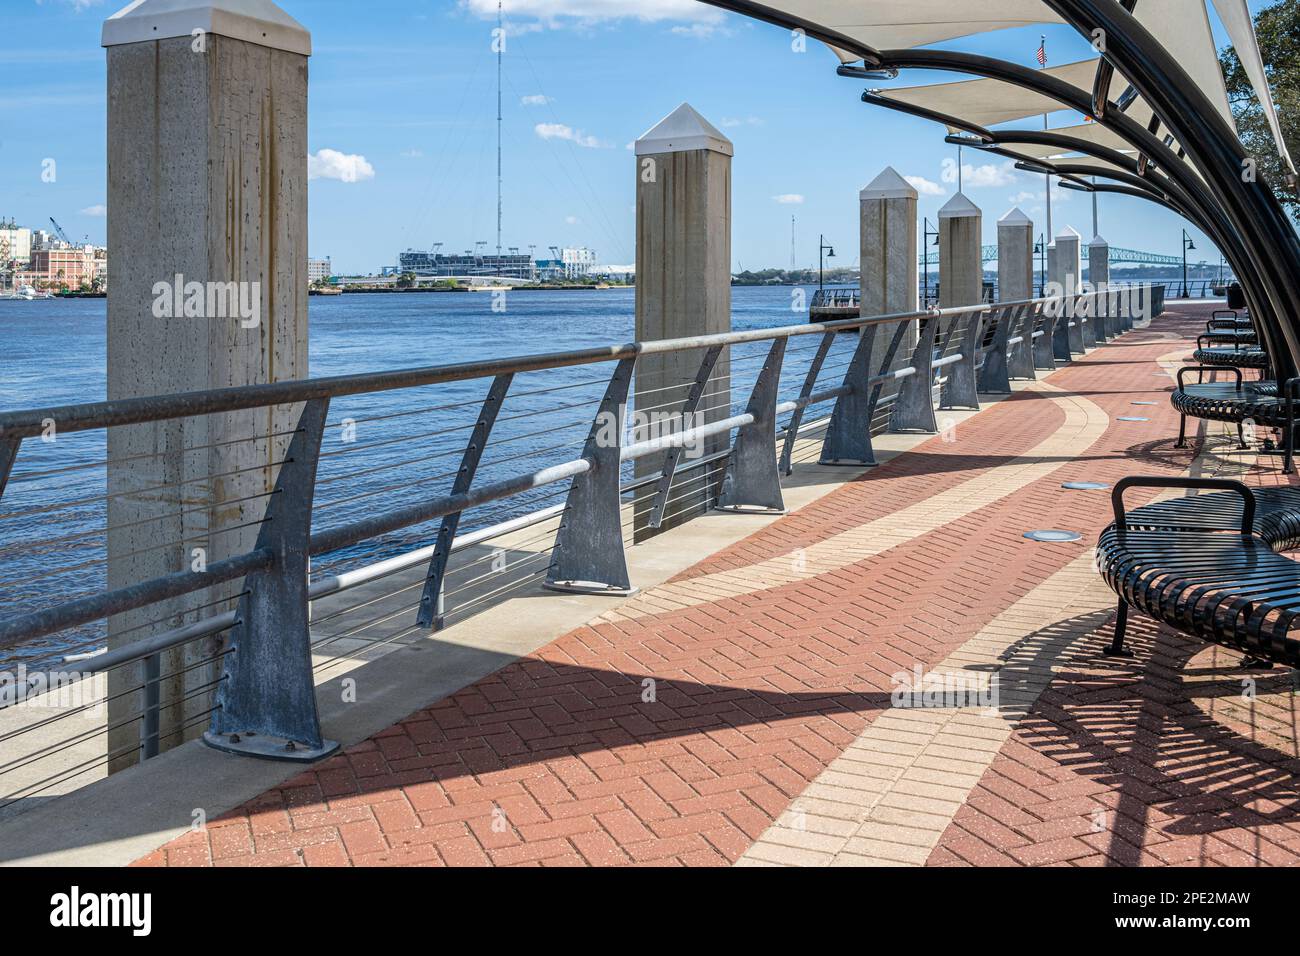 Jacksonville, Florida's downtown Southbank Riverwalk along the St. Johns River with the Jacksonville Jaguars Stadium in the background. (USA) Stock Photo